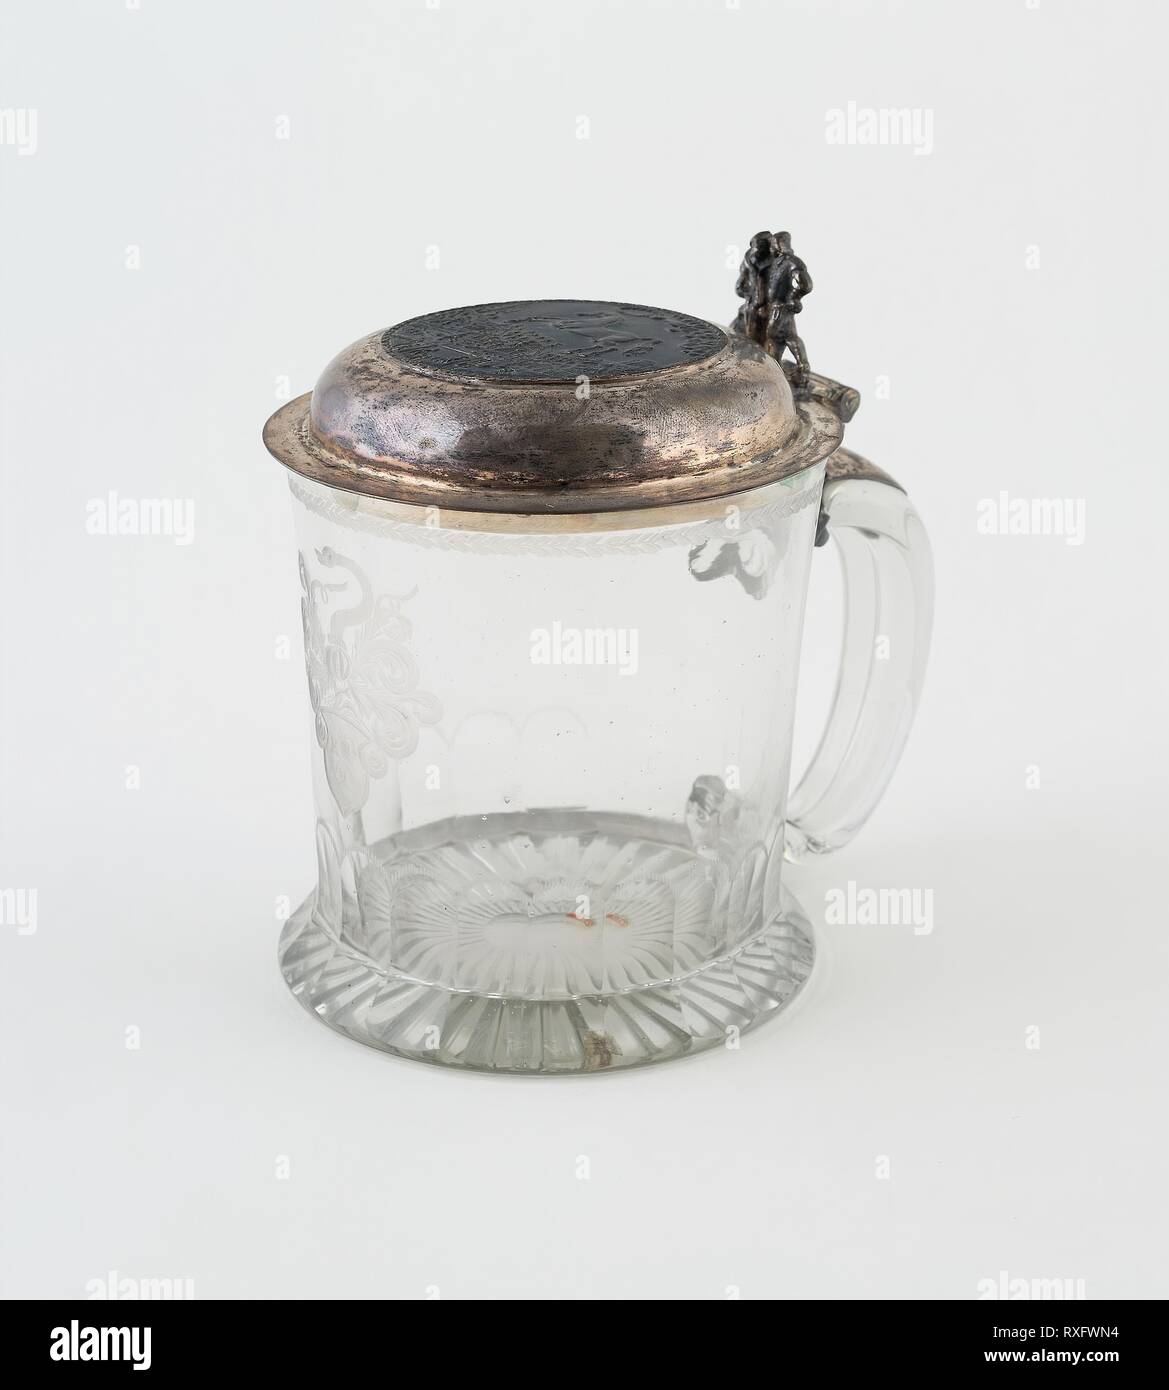 Tankard. Germany. Date: 1725-1735. Dimensions: 14 x 10.3 cm (5 1/2 x 4 1/16 in.). Glass with silver cover. Origin: Germany. Museum: The Chicago Art Institute. Stock Photo